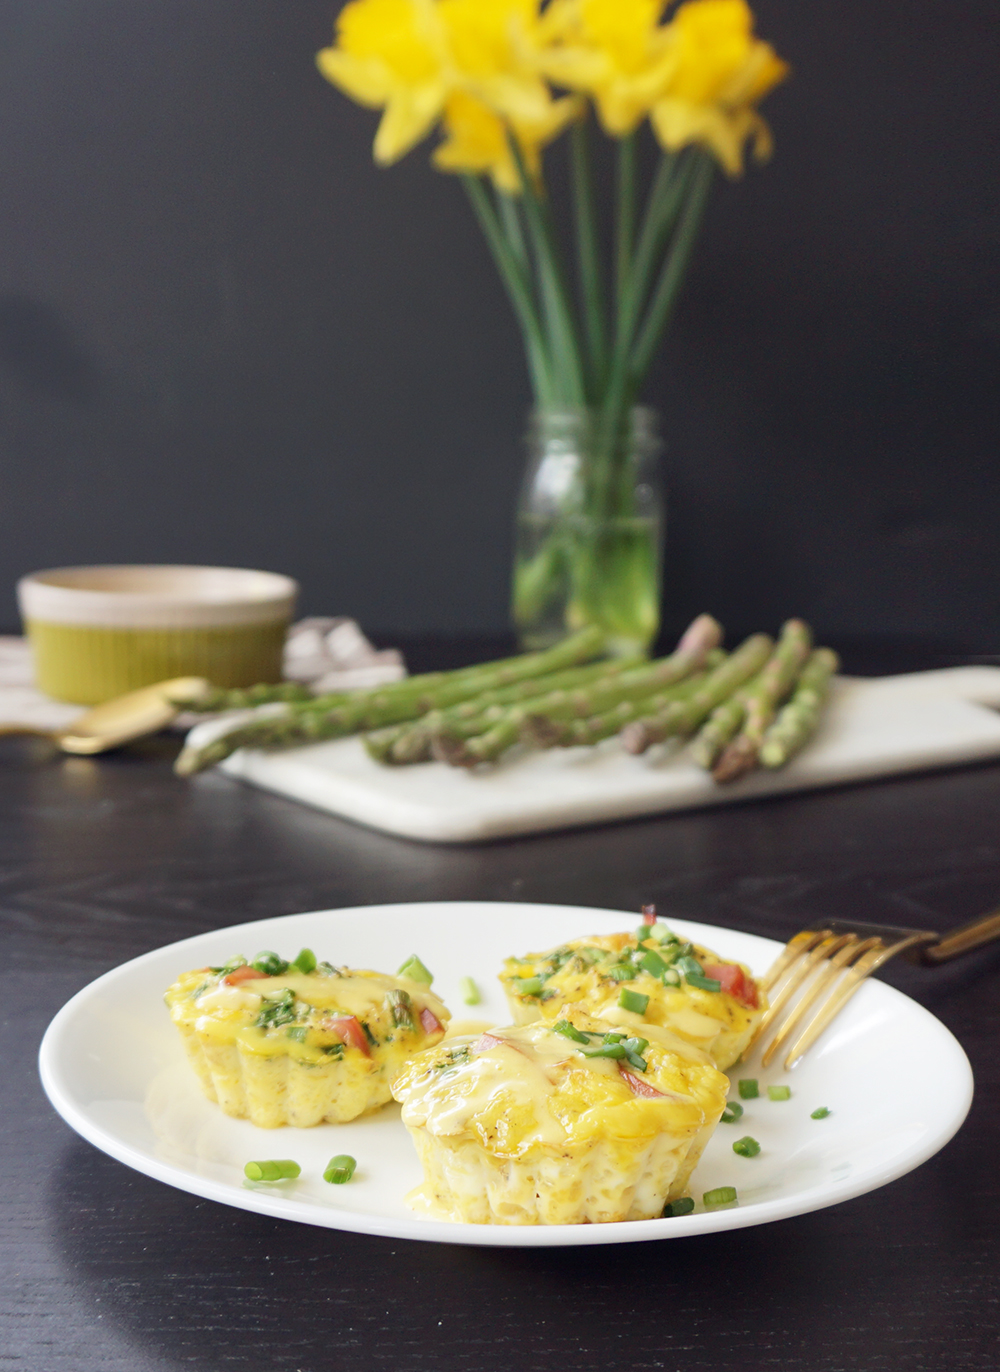 Eggs benedict cups with easy hollandaise sauce